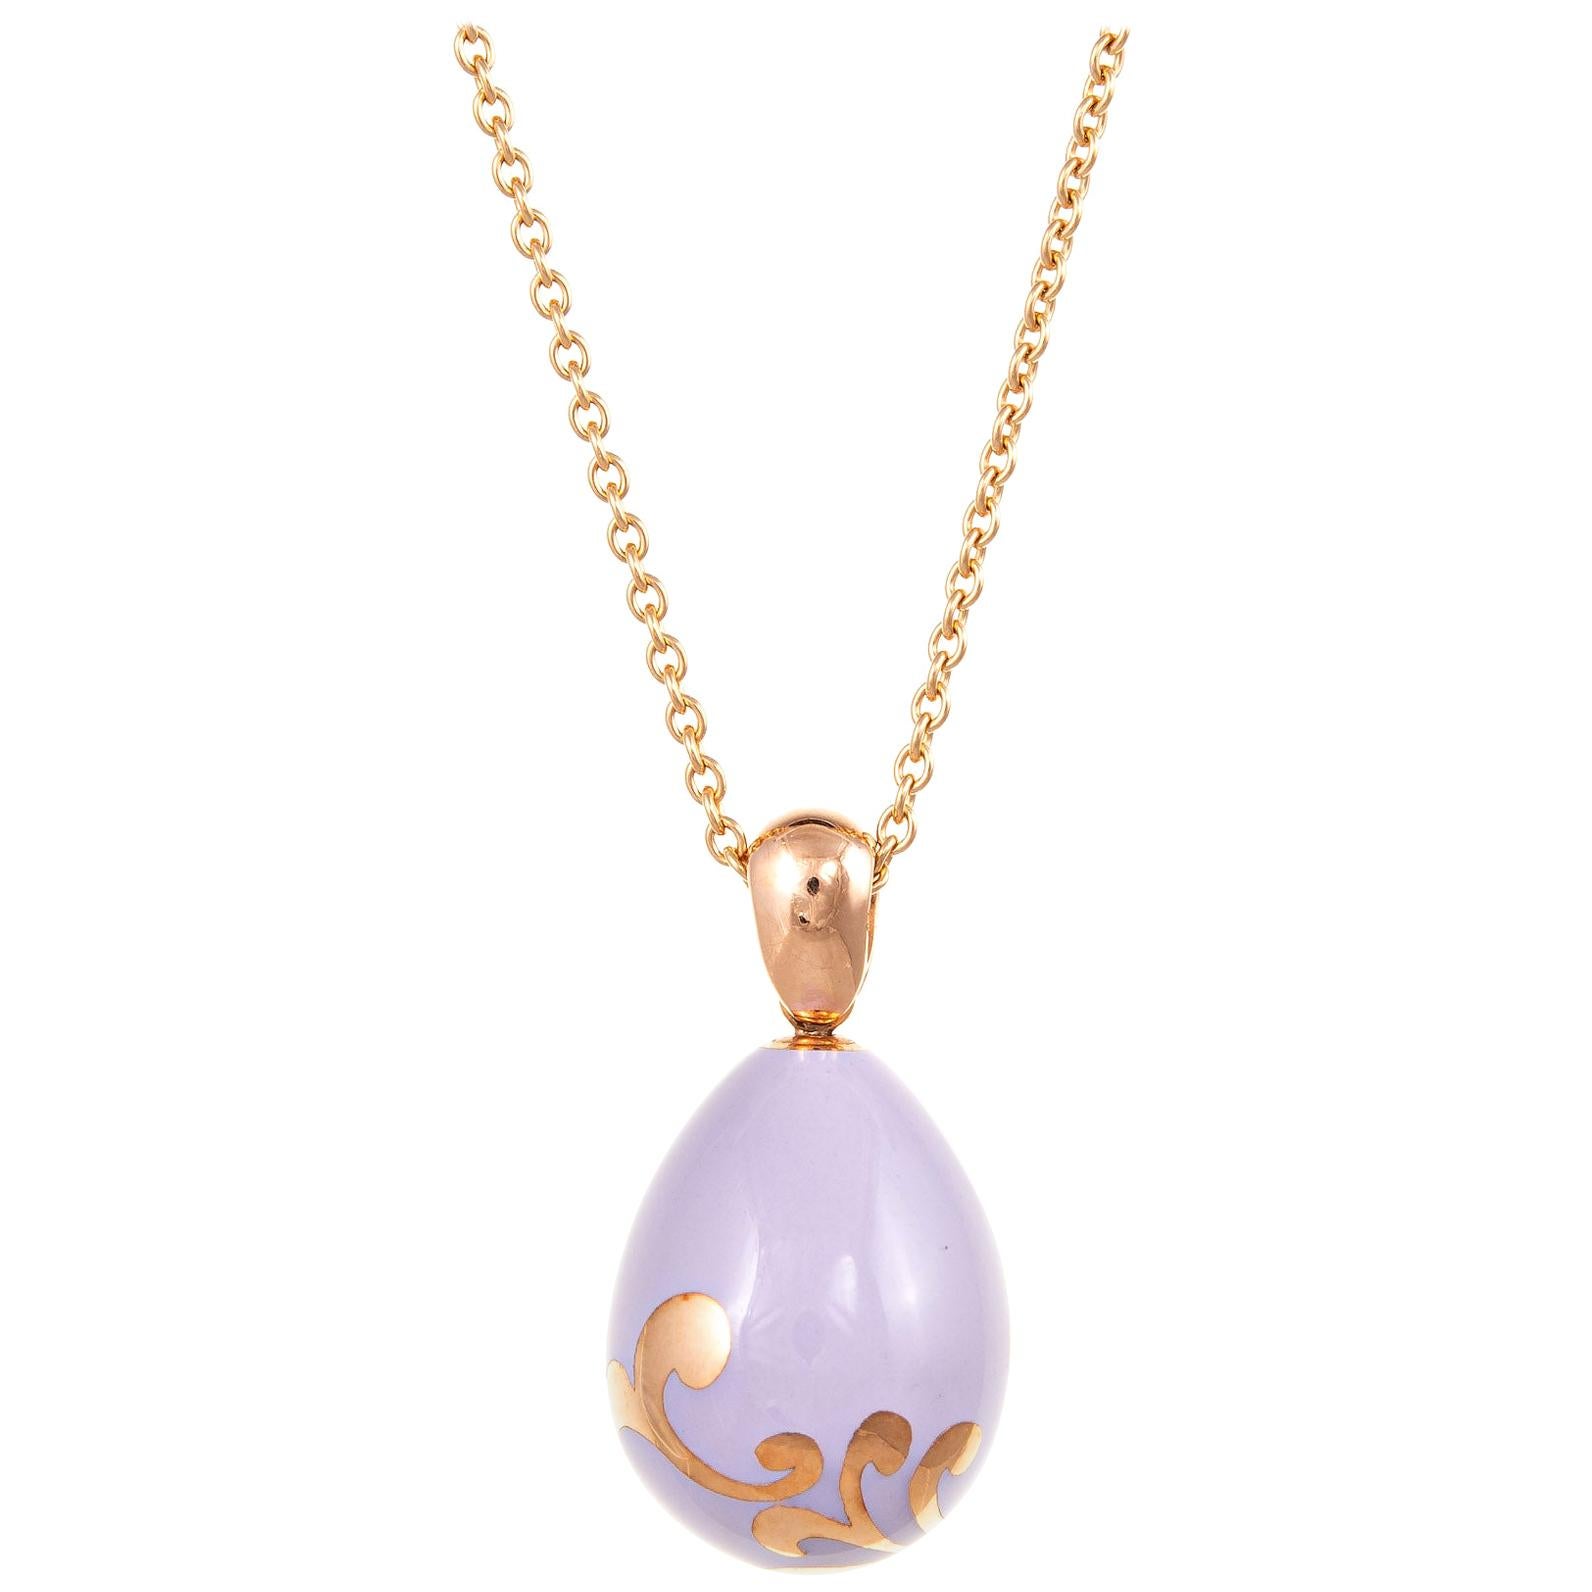 Faberge Egg Pendant Necklace 18 Karat Rose Gold Lilac Purple Fine Jewelry Chain For Sale